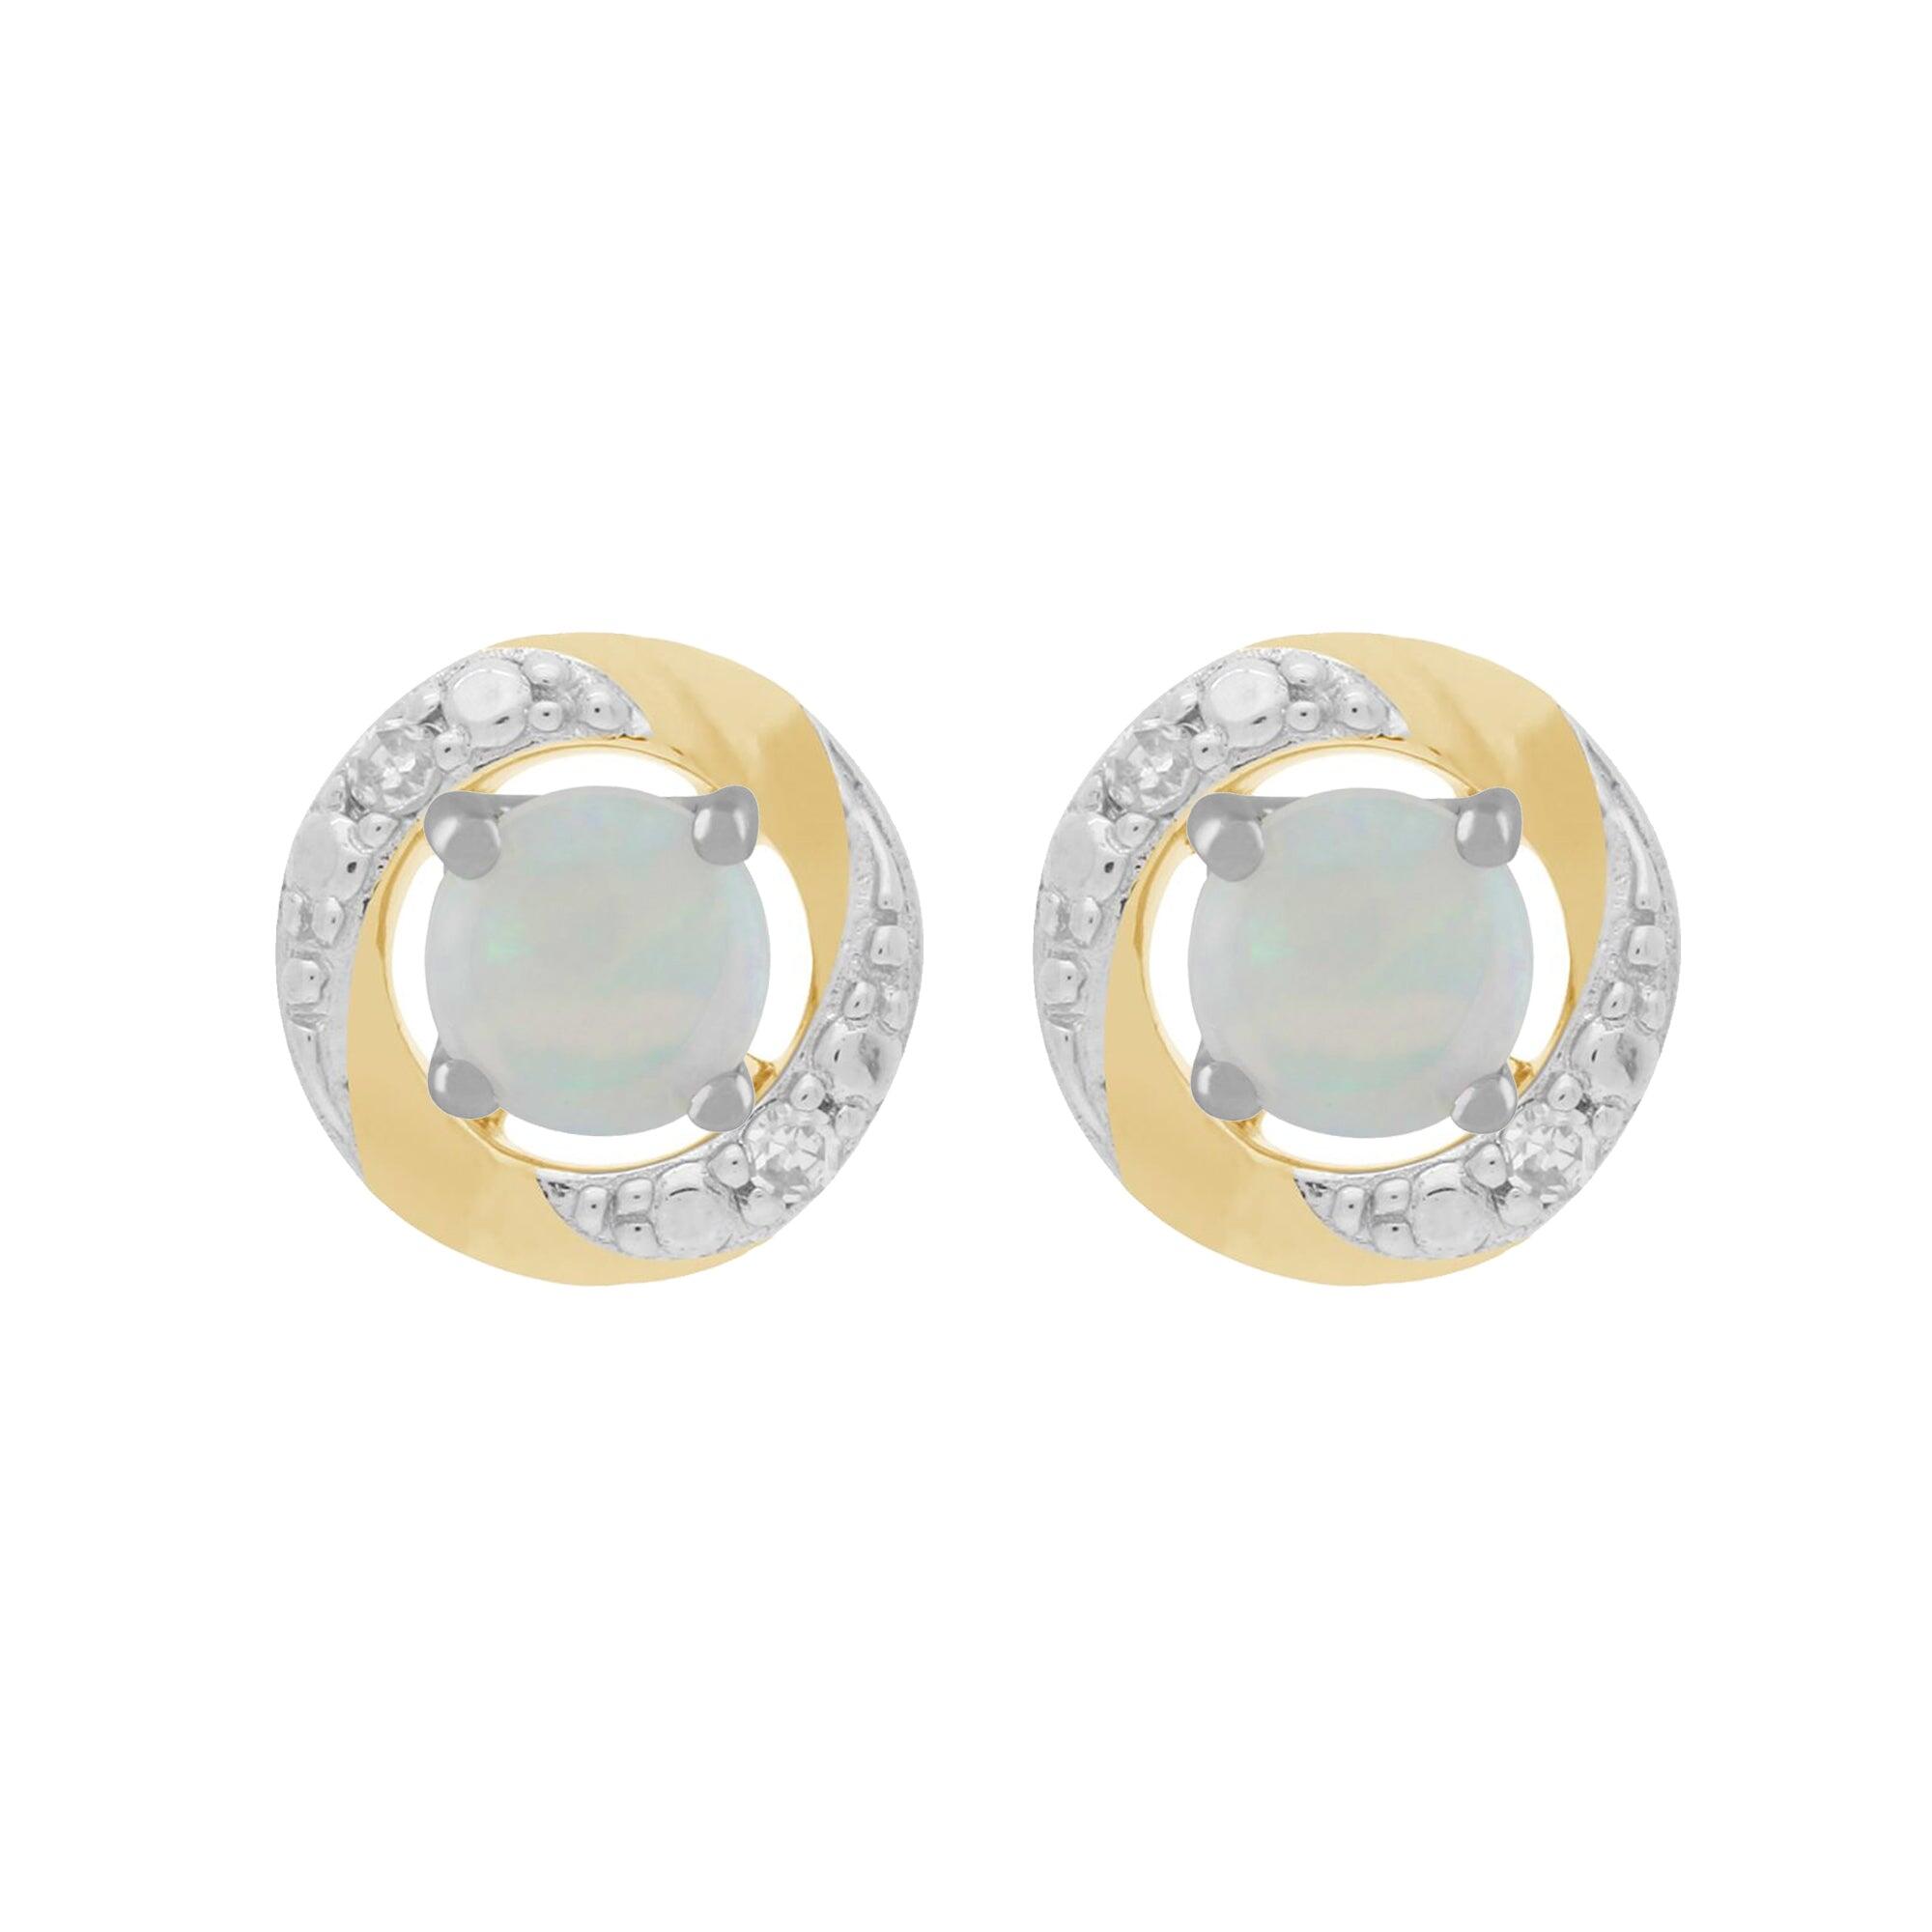 9ct White Gold Opal Stud Earrings with Detachable Diamond Halo Ear Jacket in 9ct Yellow Gold